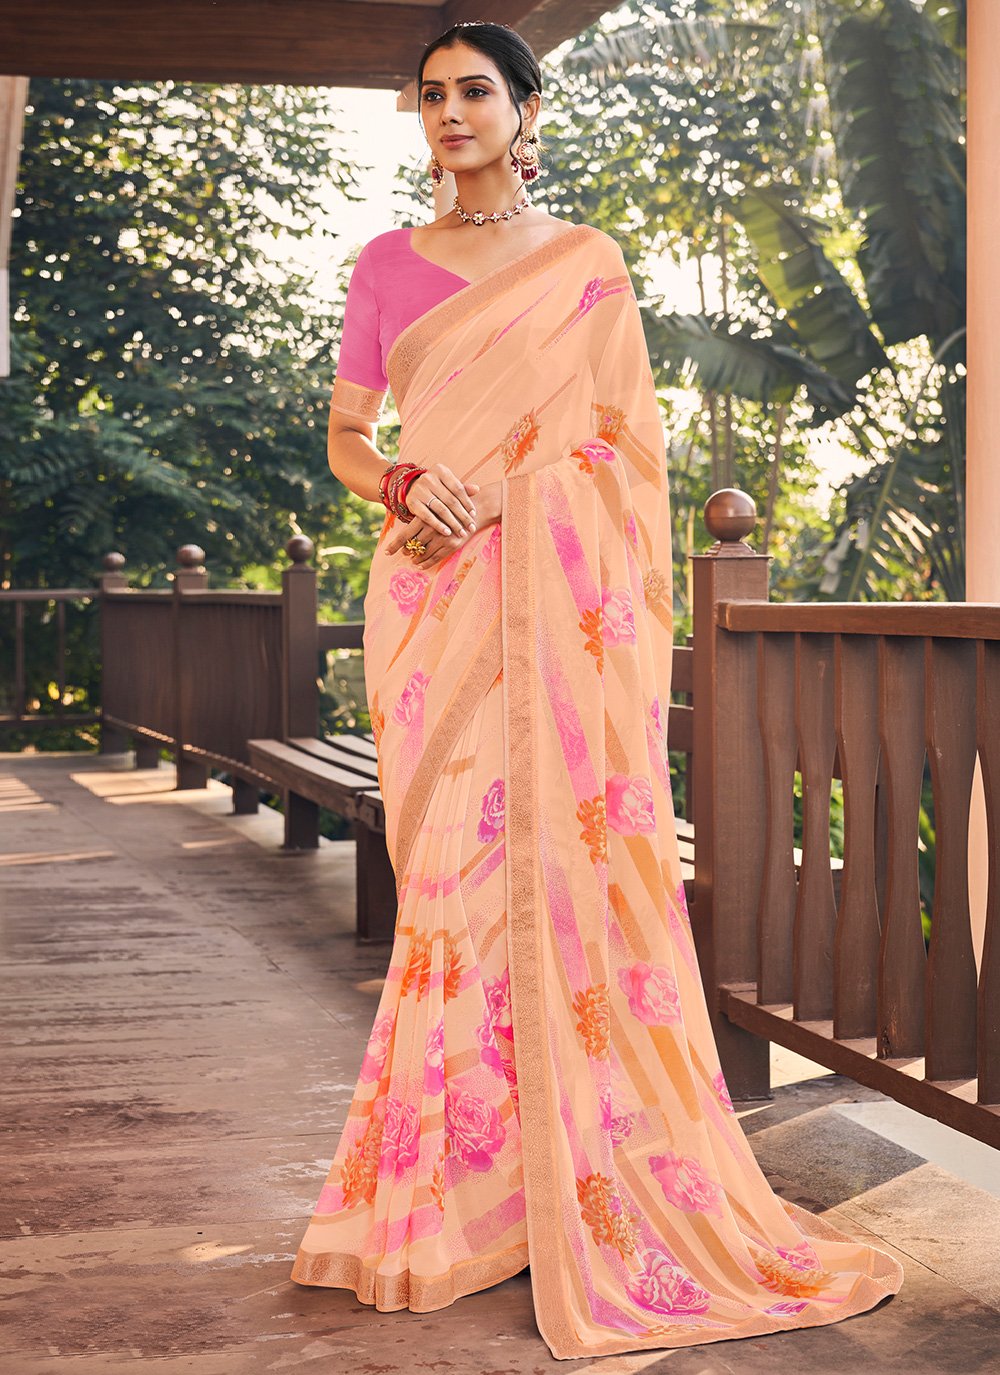 Bollywood Celebrities In Printed Sarees - K4 Fashion